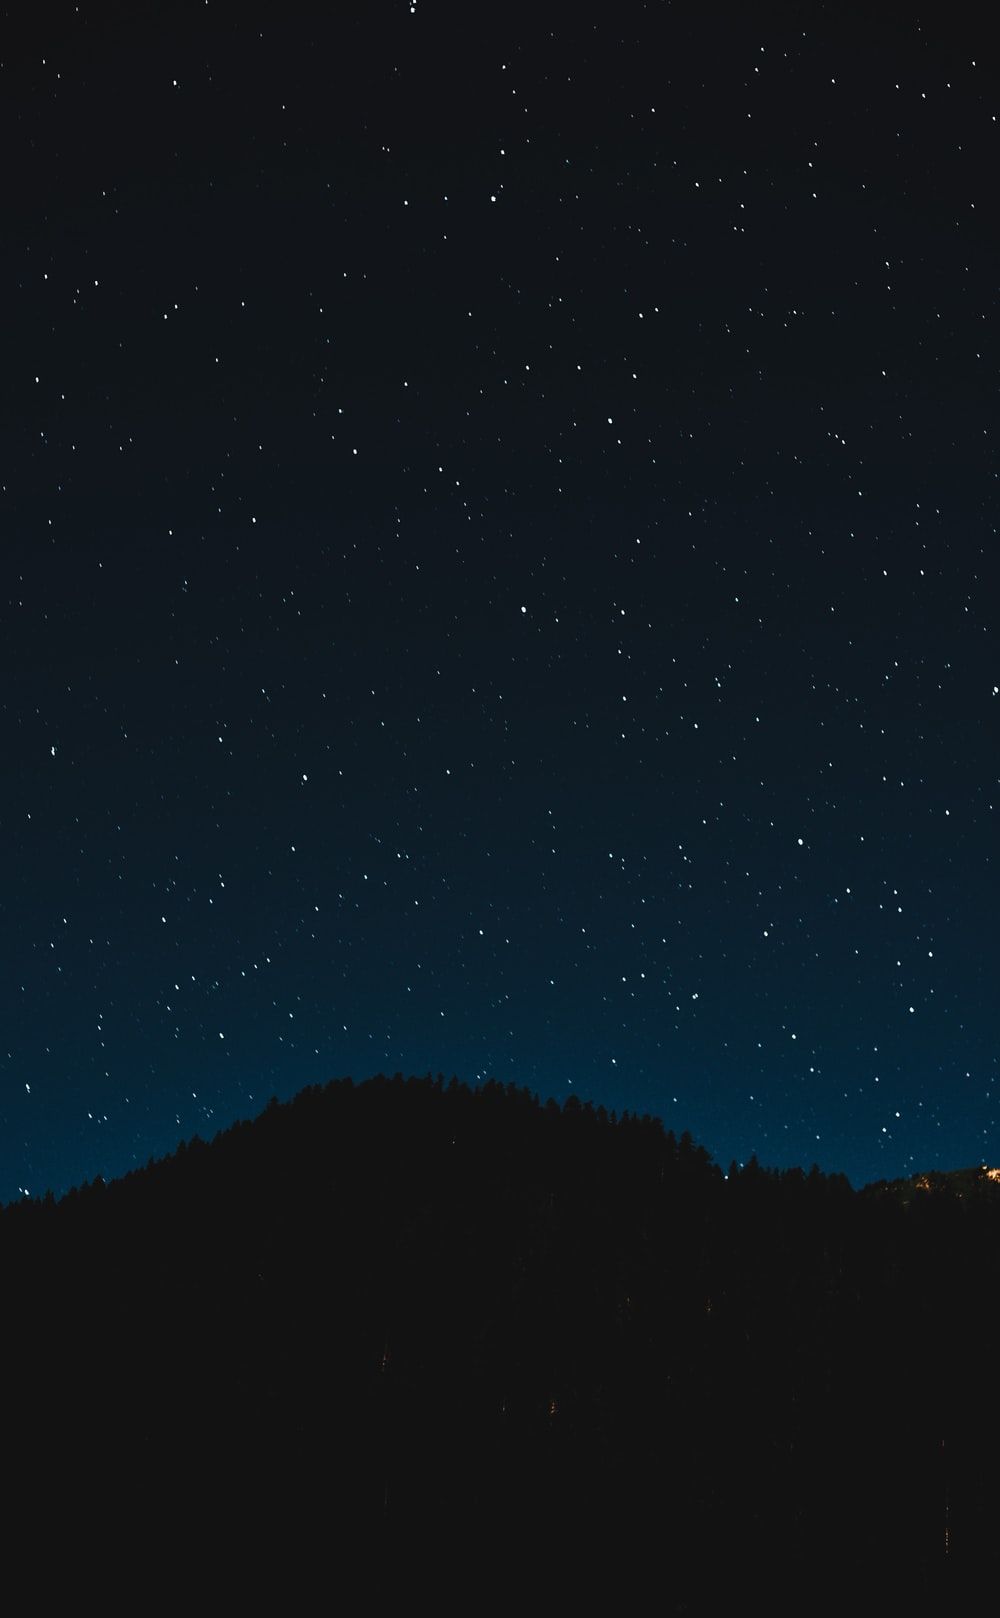 Night Clear Sky Wallpapers - Wallpaper Cave